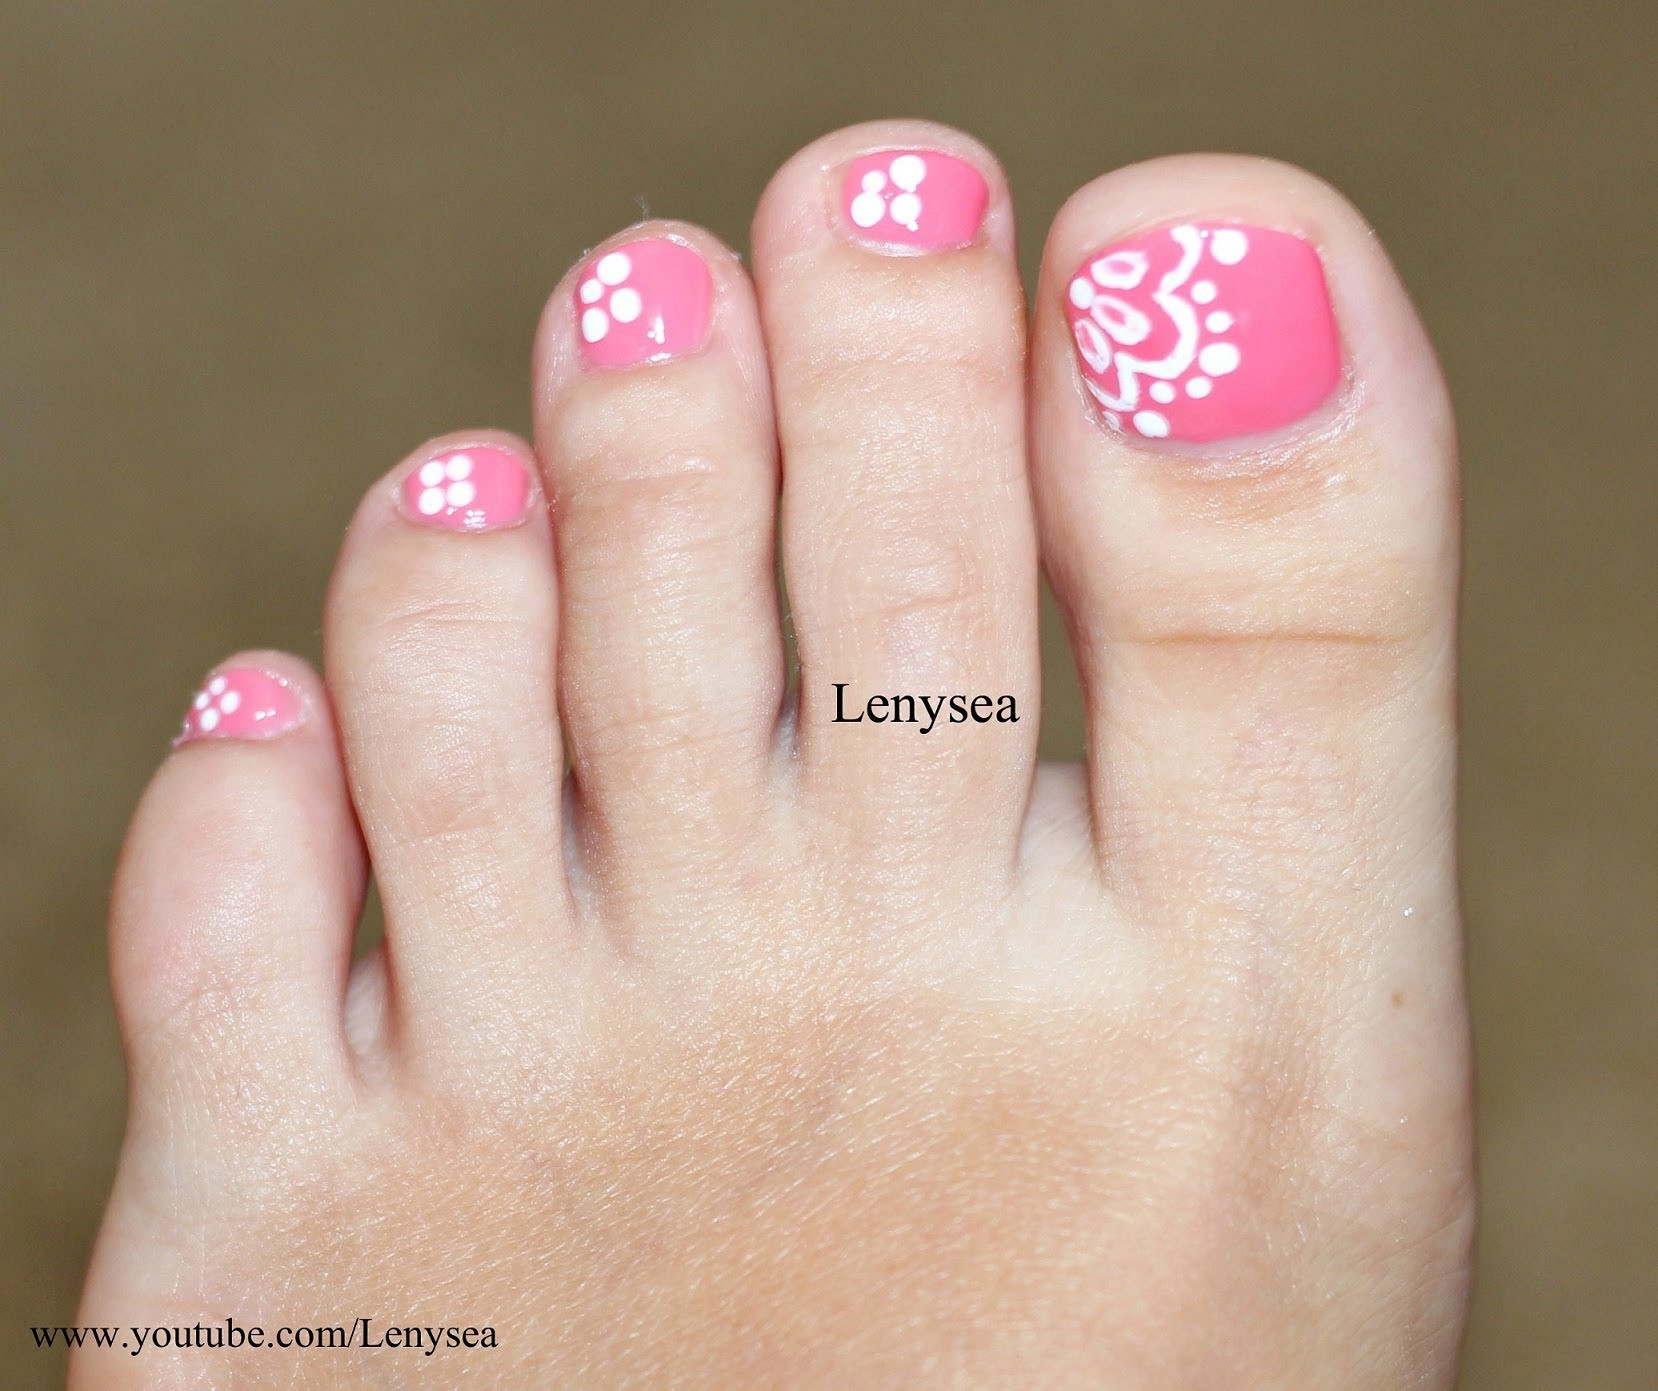 Nail Designs For Feet
 How to Get Your Feet Ready for Summer 50 Adorable Toe